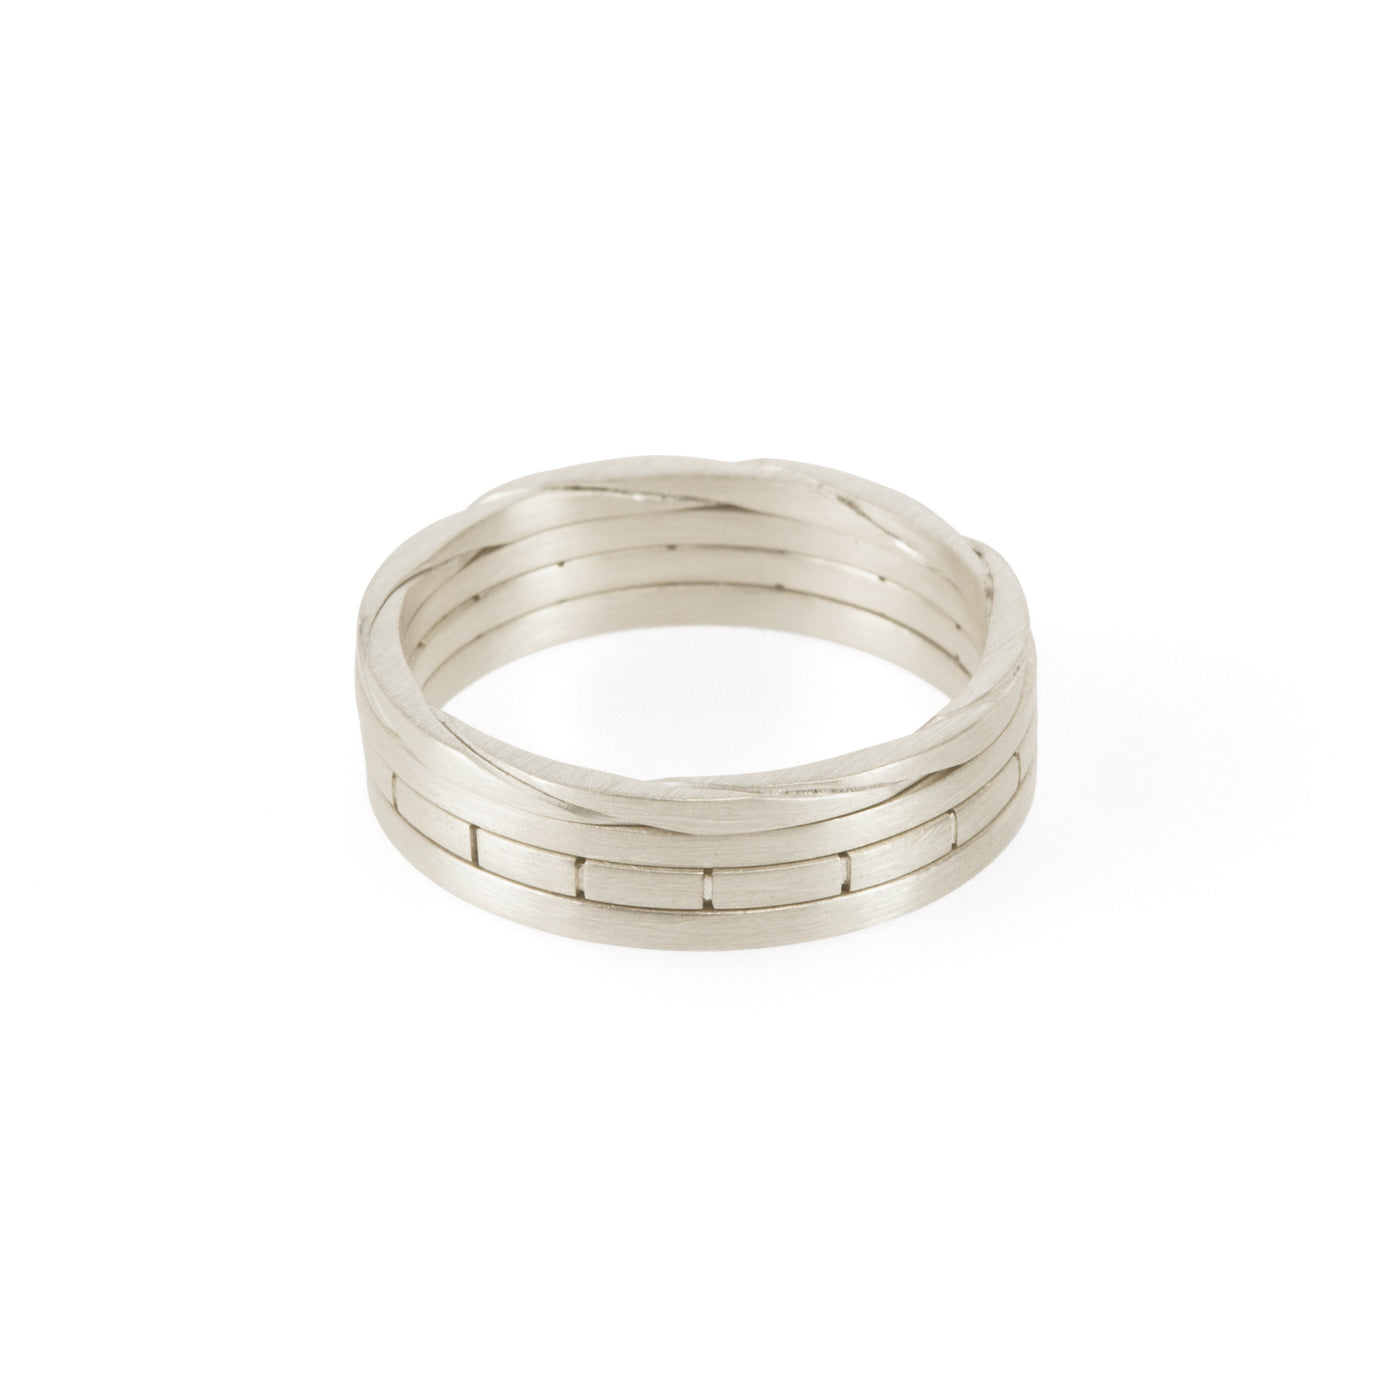 Sustainable silver stacking rings. This ethical Traveller’s Set is handmade in Cape Town in recycled silver from e-waste.